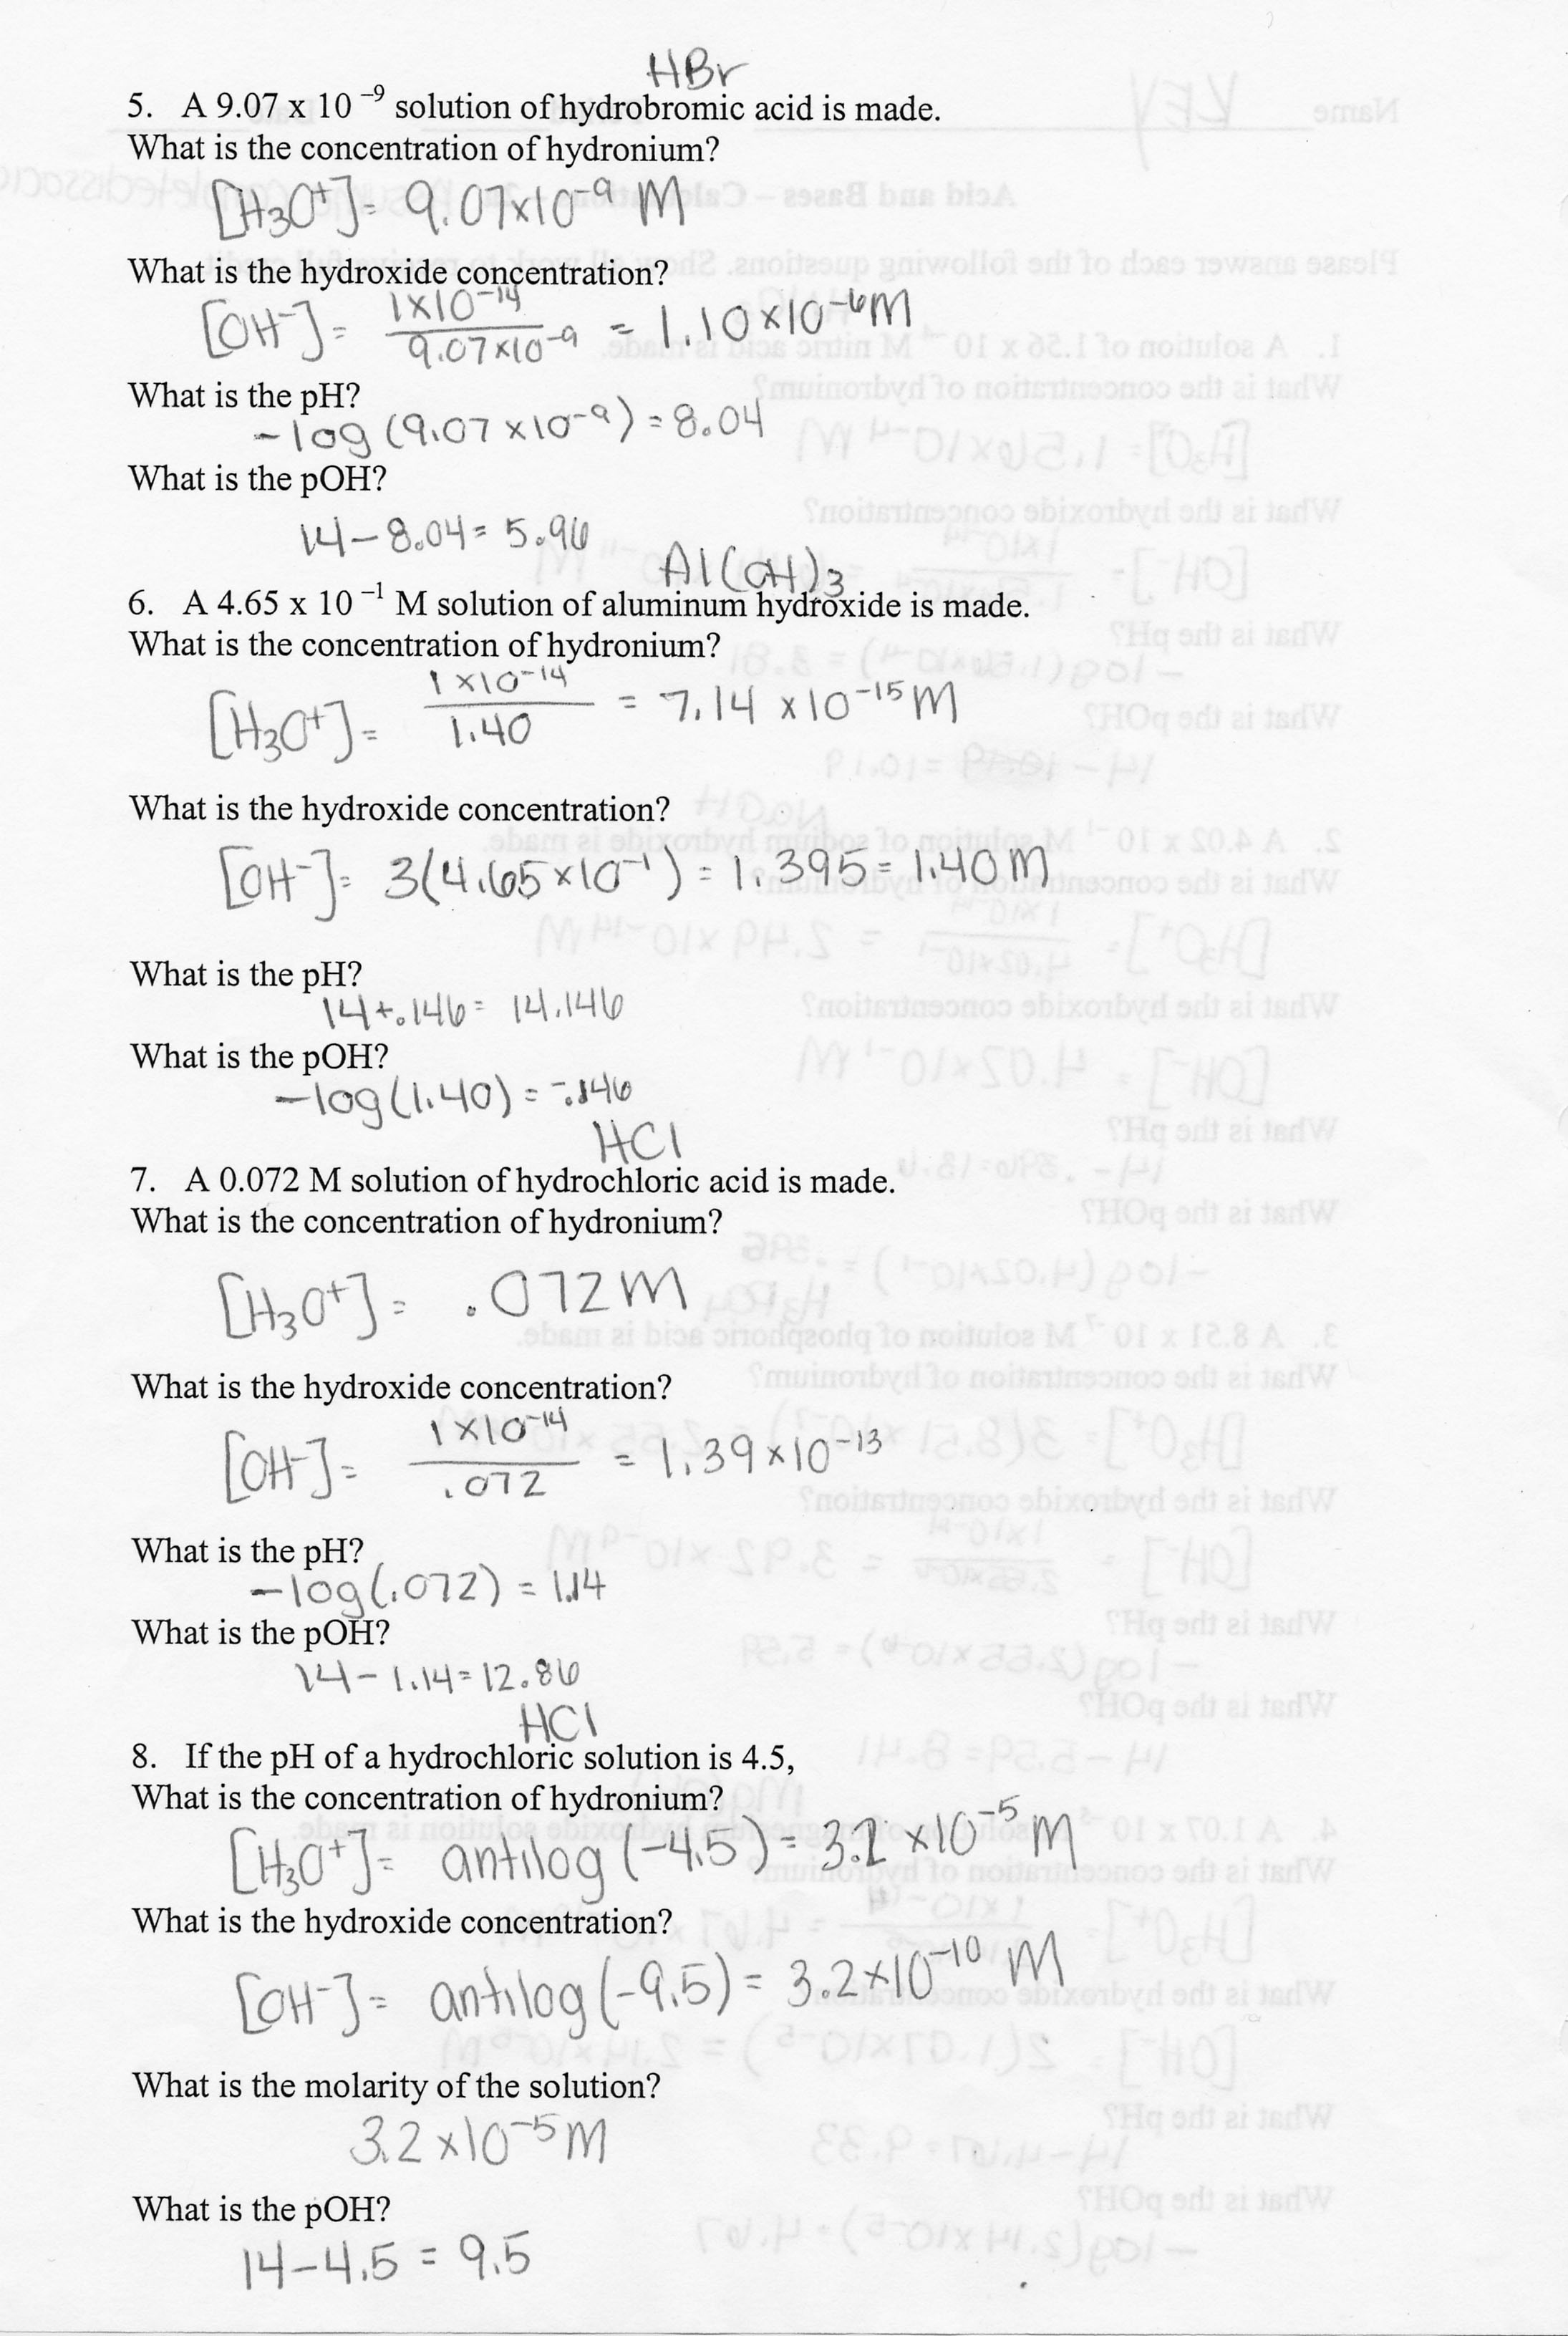 Nuclear Chemistry Worksheet Answers